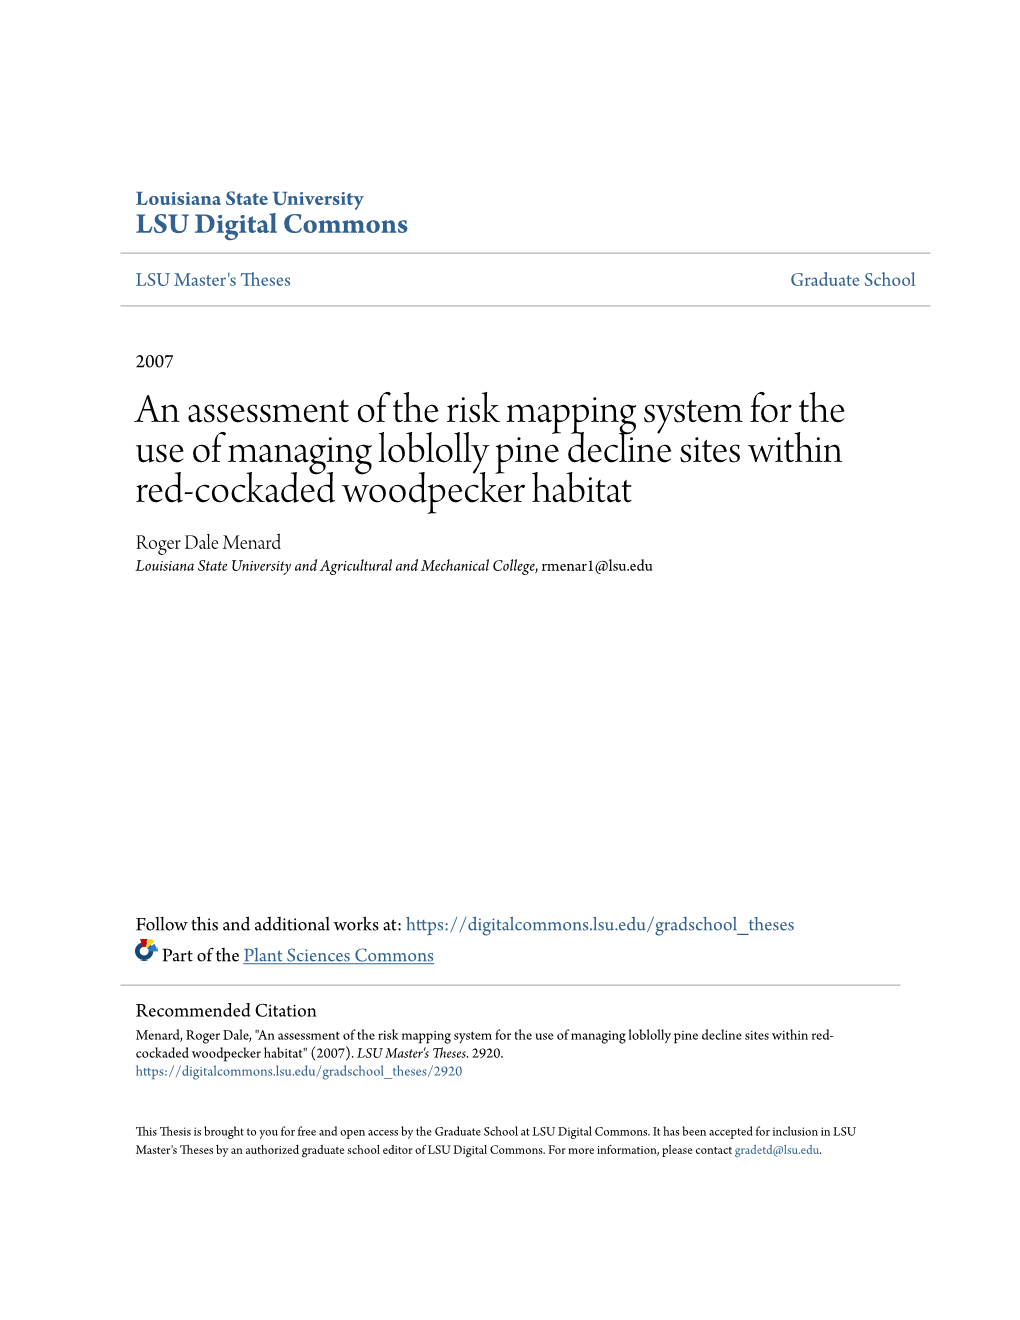 An Assessment of the Risk Mapping System for the Use of Managing